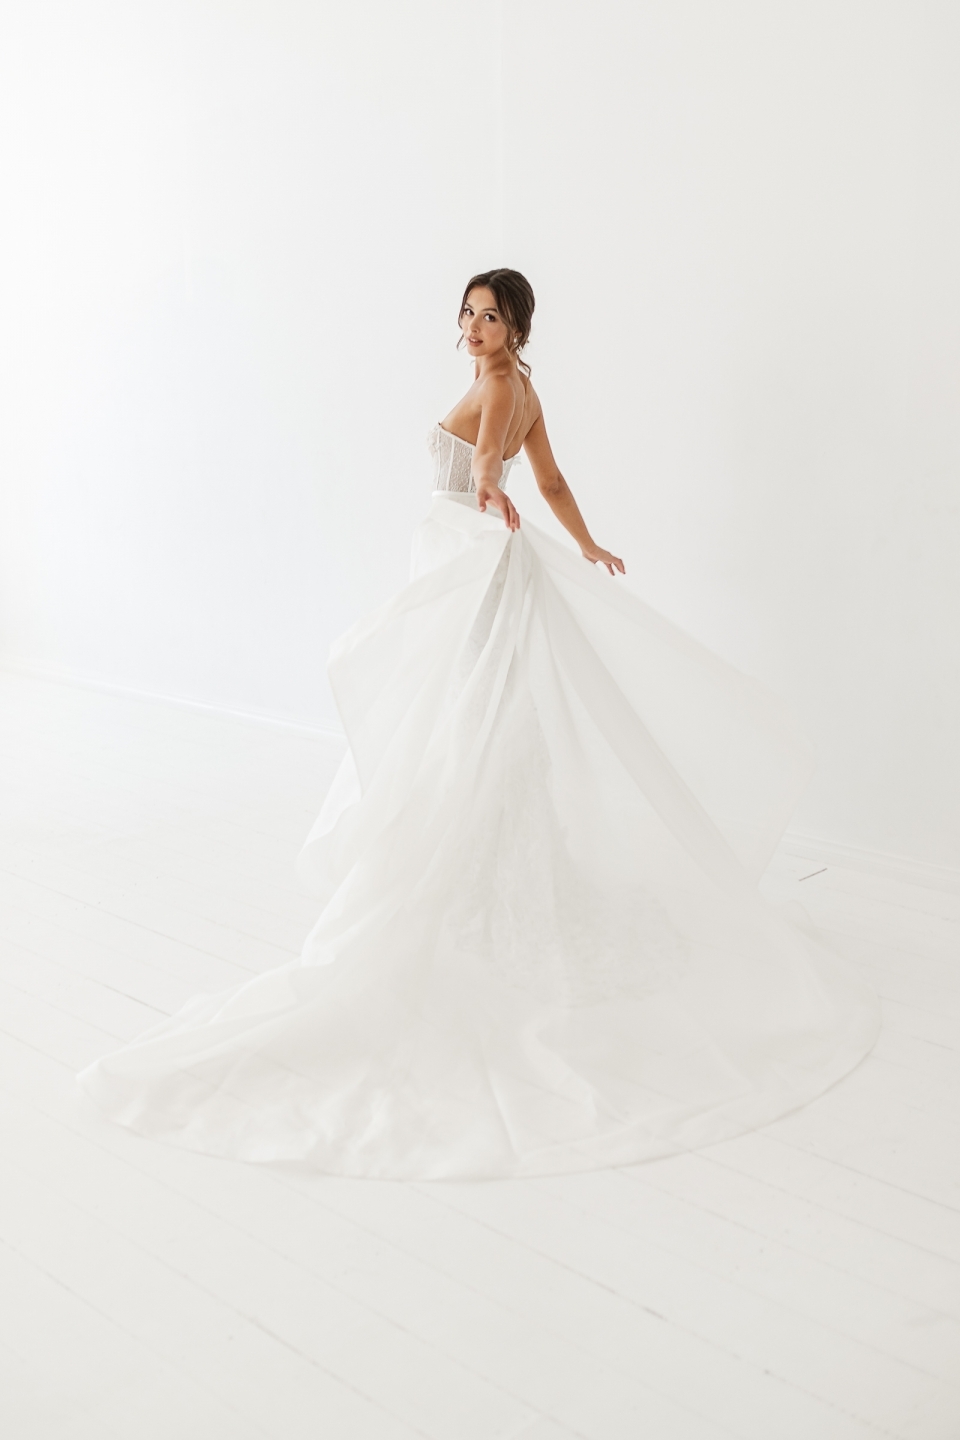 Shop Bridal Capes + Overskirts for Your Wedding Dress Online